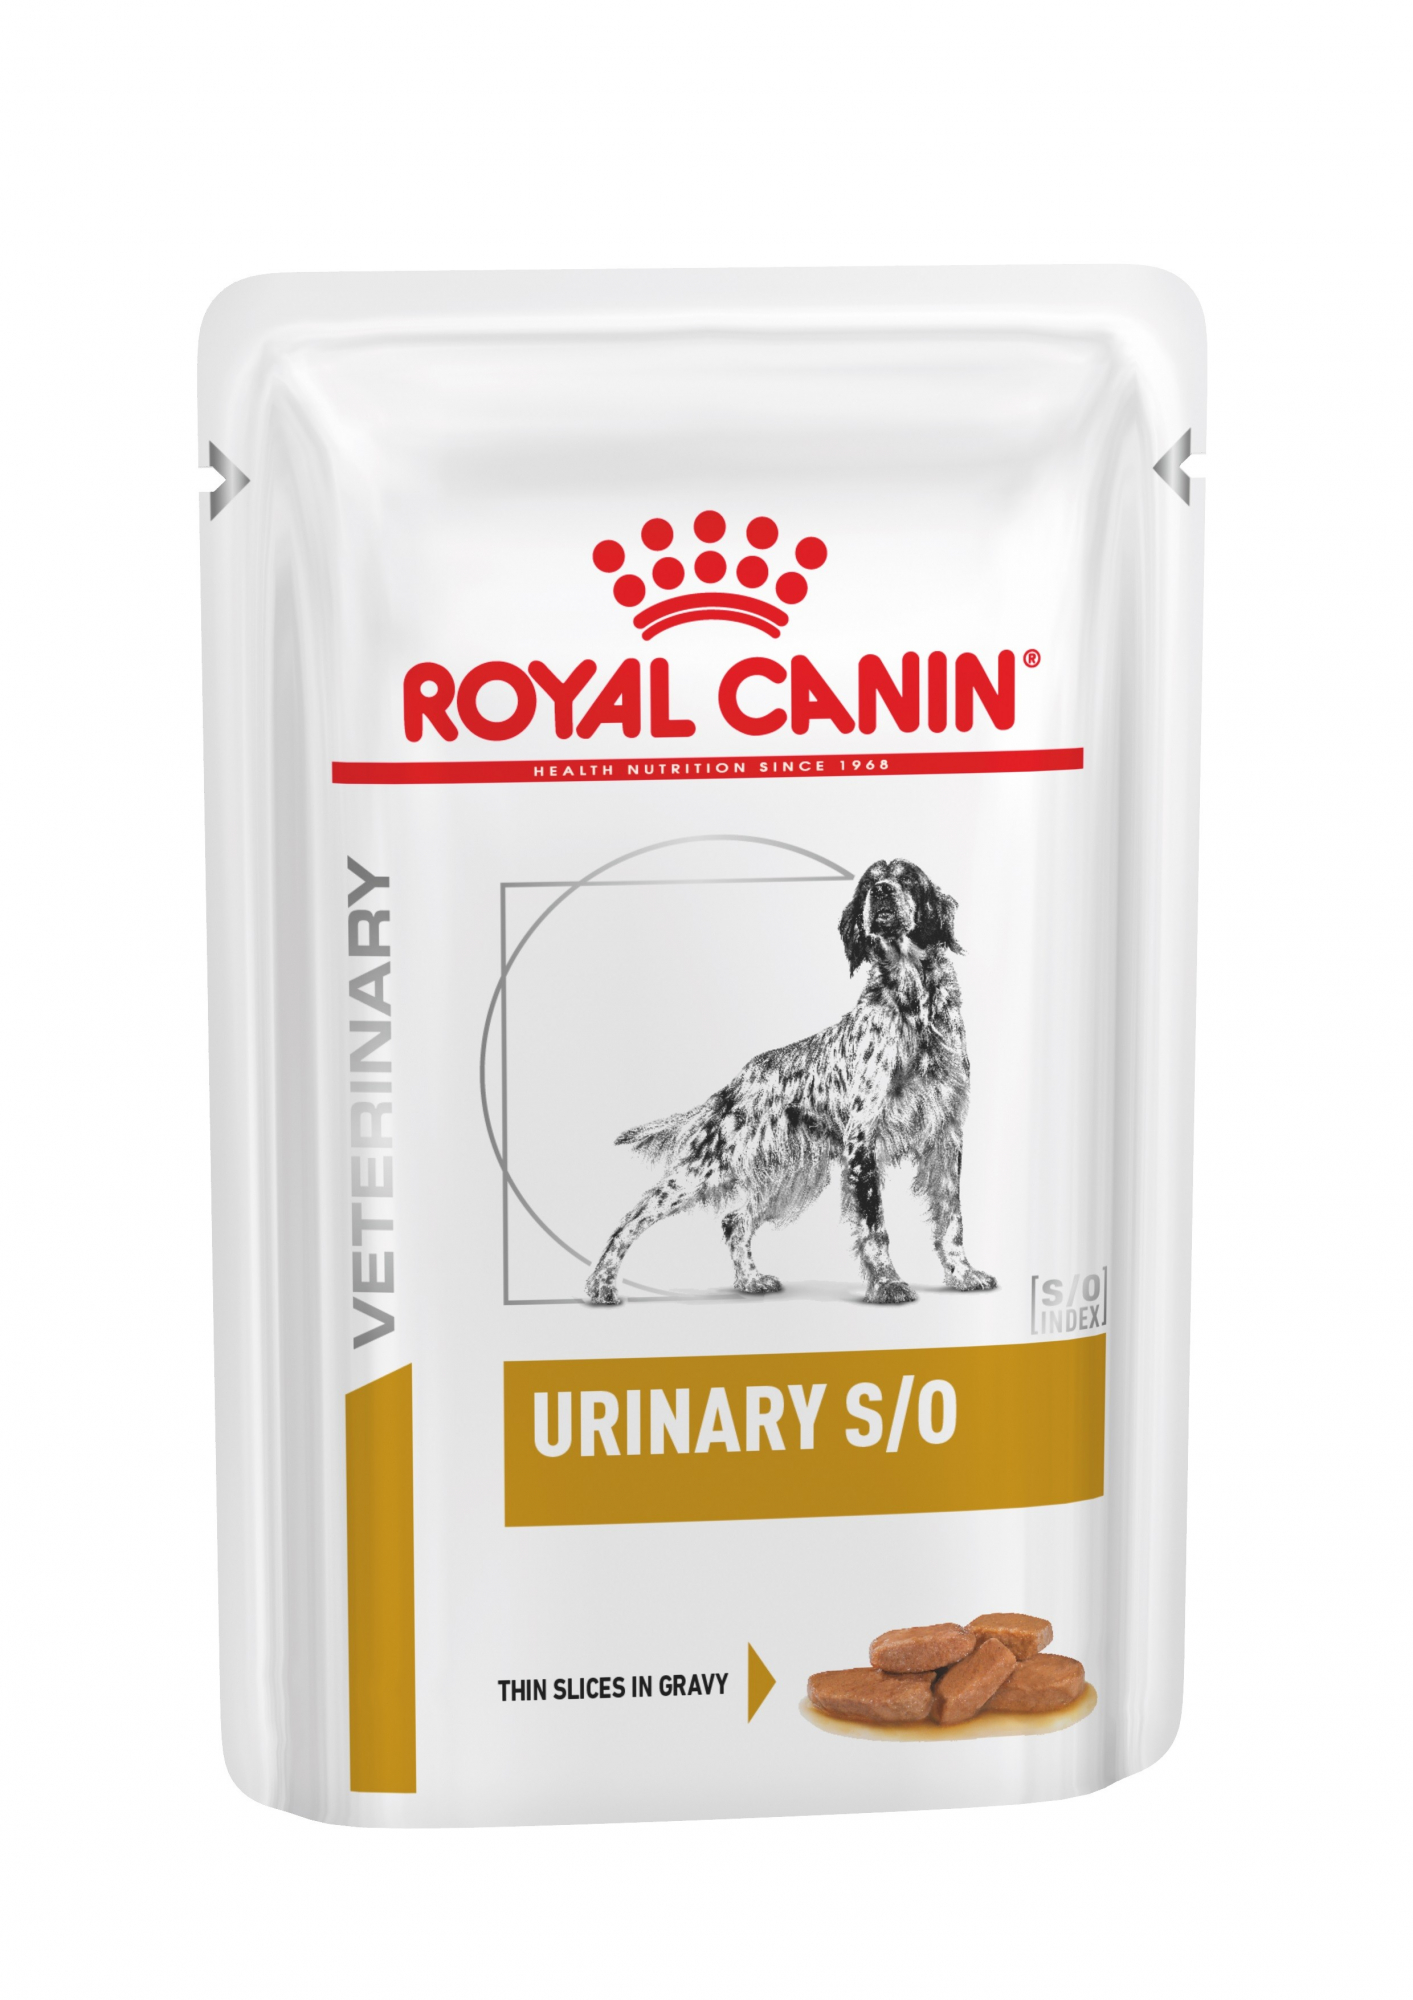 Royal Canin Veterinary Dog Urinary S/O Moderate Calorie Wet